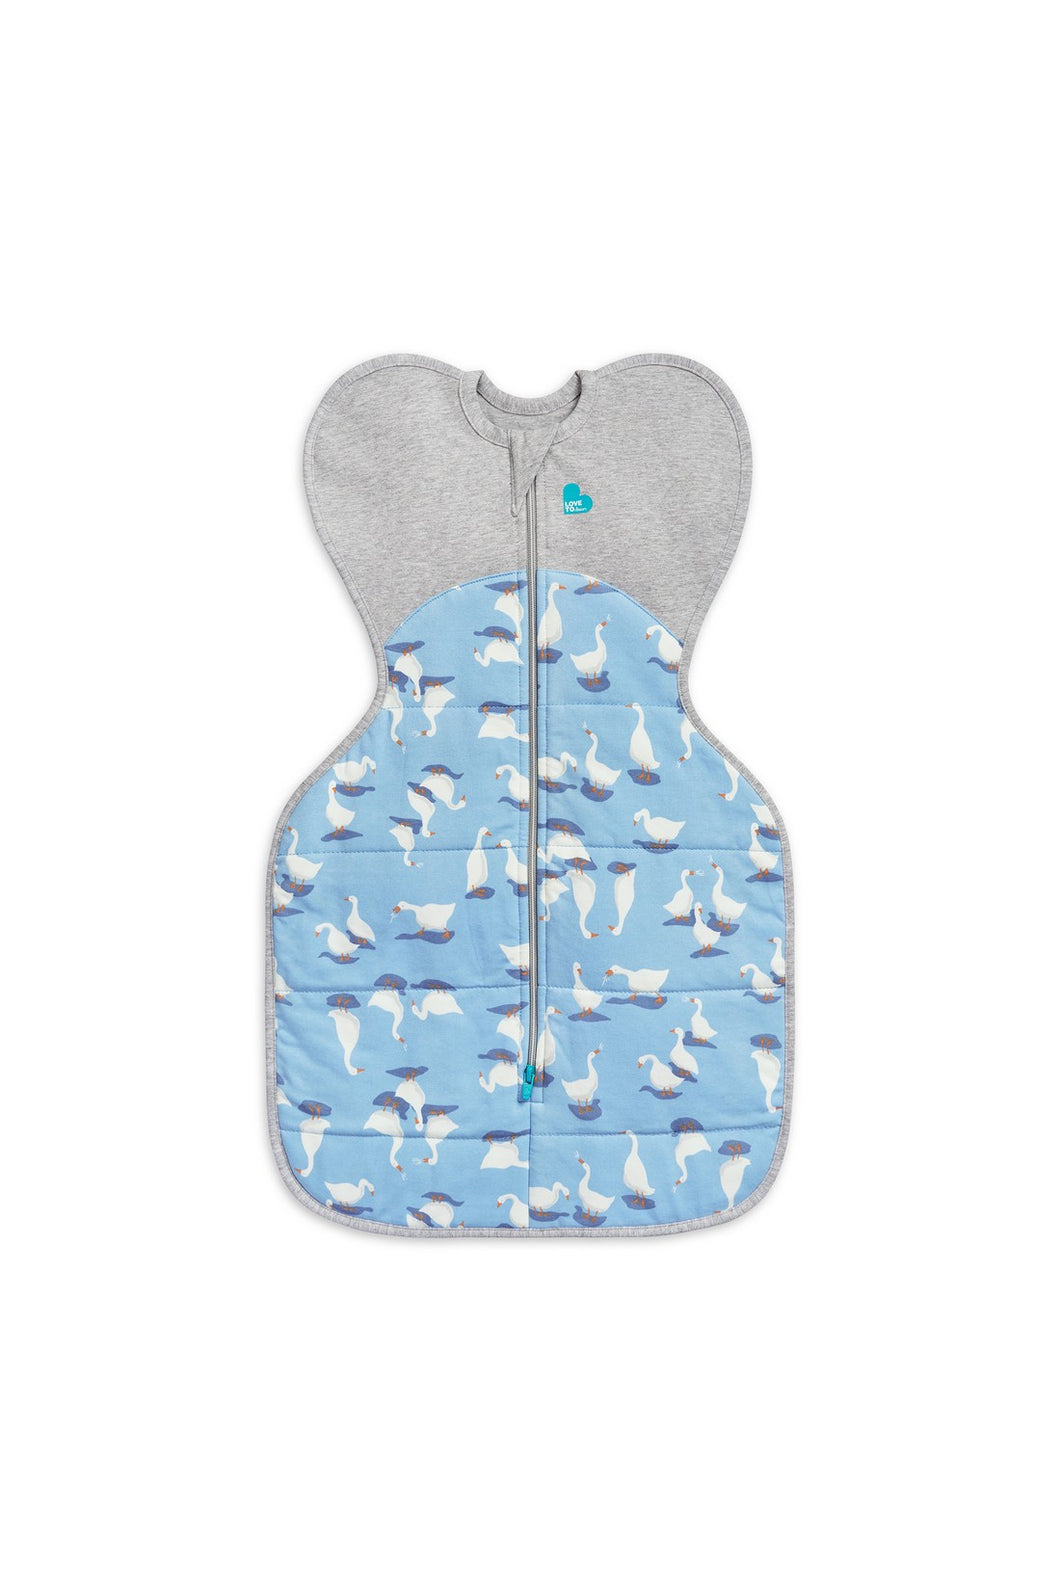 Love To Dream Swaddle Up Warm Blue Silly Goose Dusty Blue